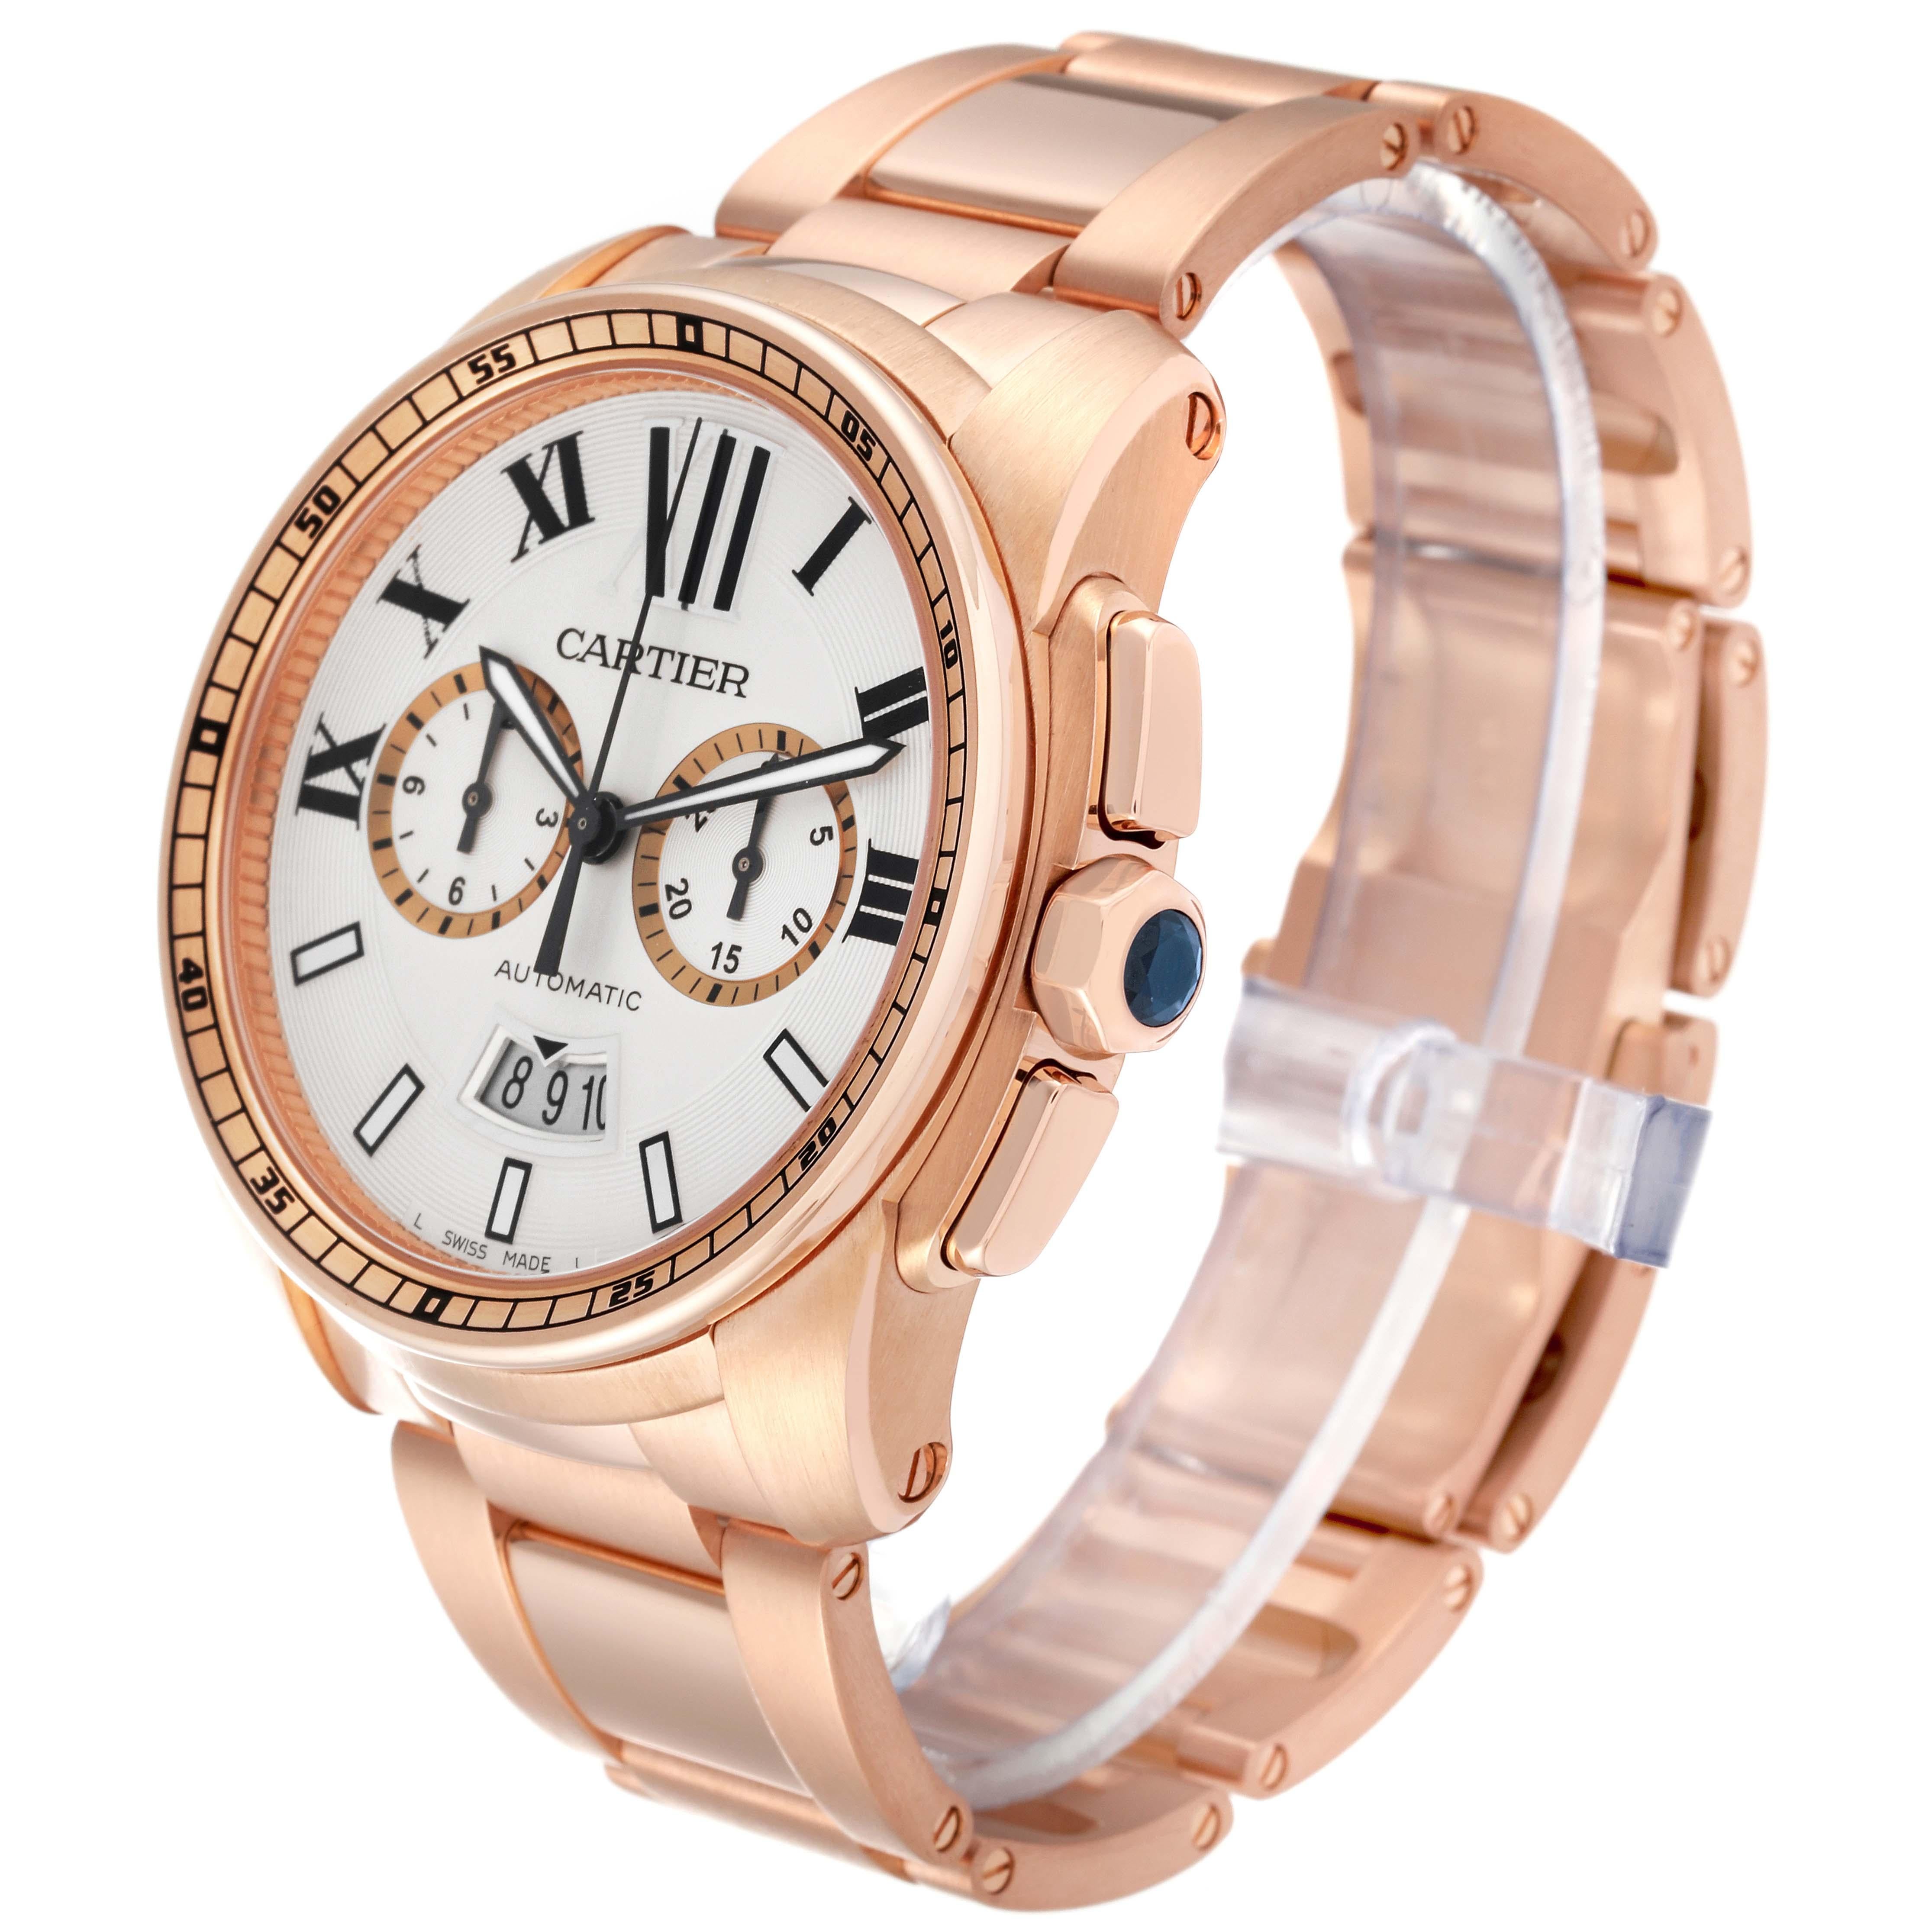 Men's Cartier Calibre Silver Dial Rose Gold Chronograph Mens Watch W7100047 Papers